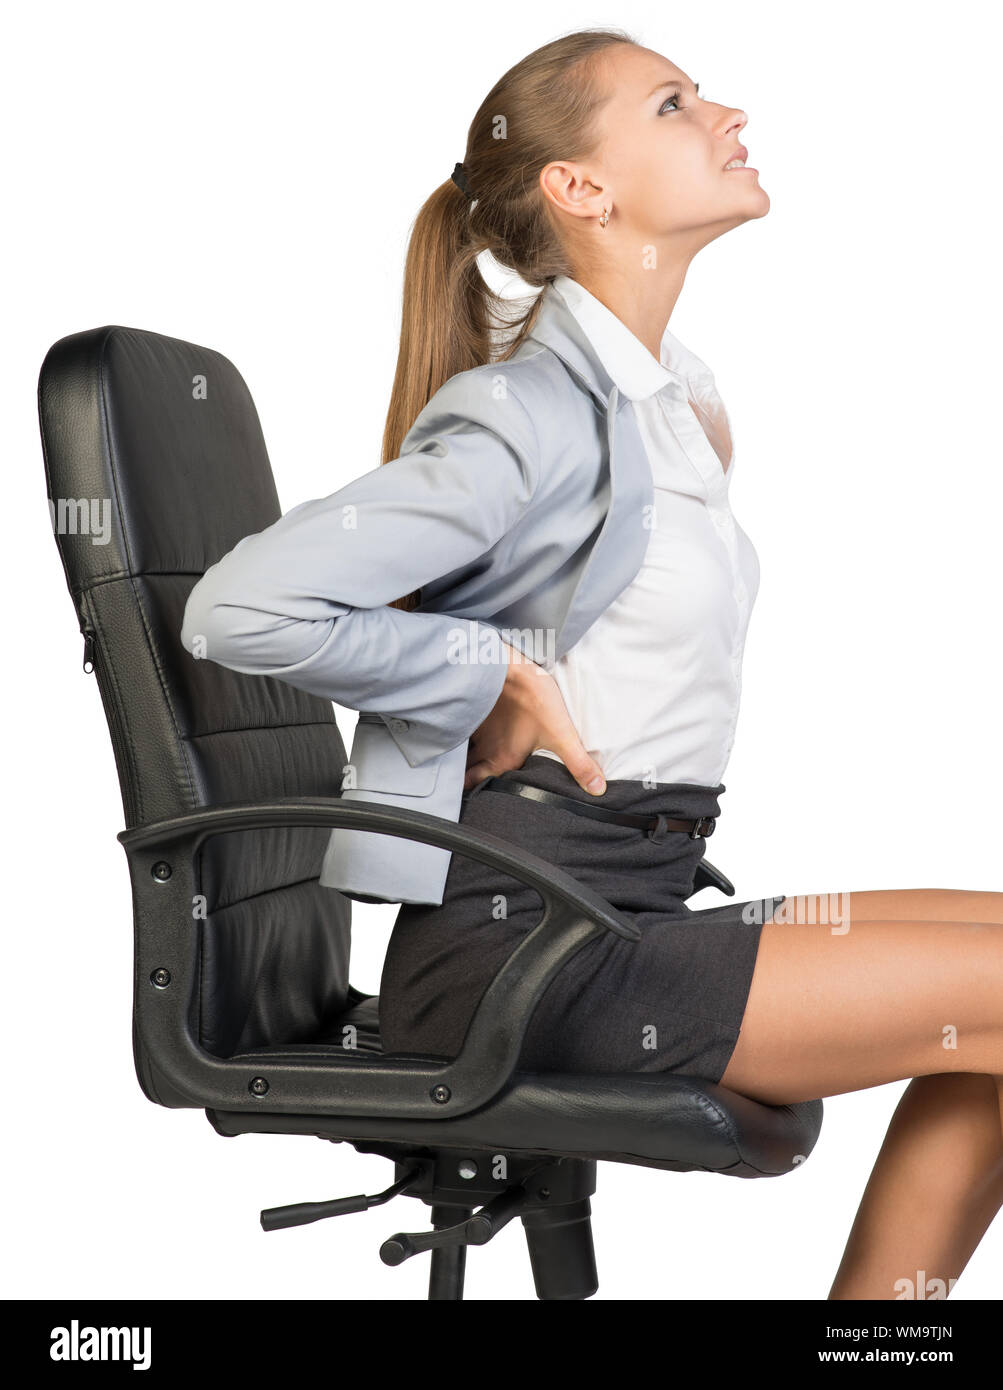 How To Reduce Back Pain On The Office Chair?